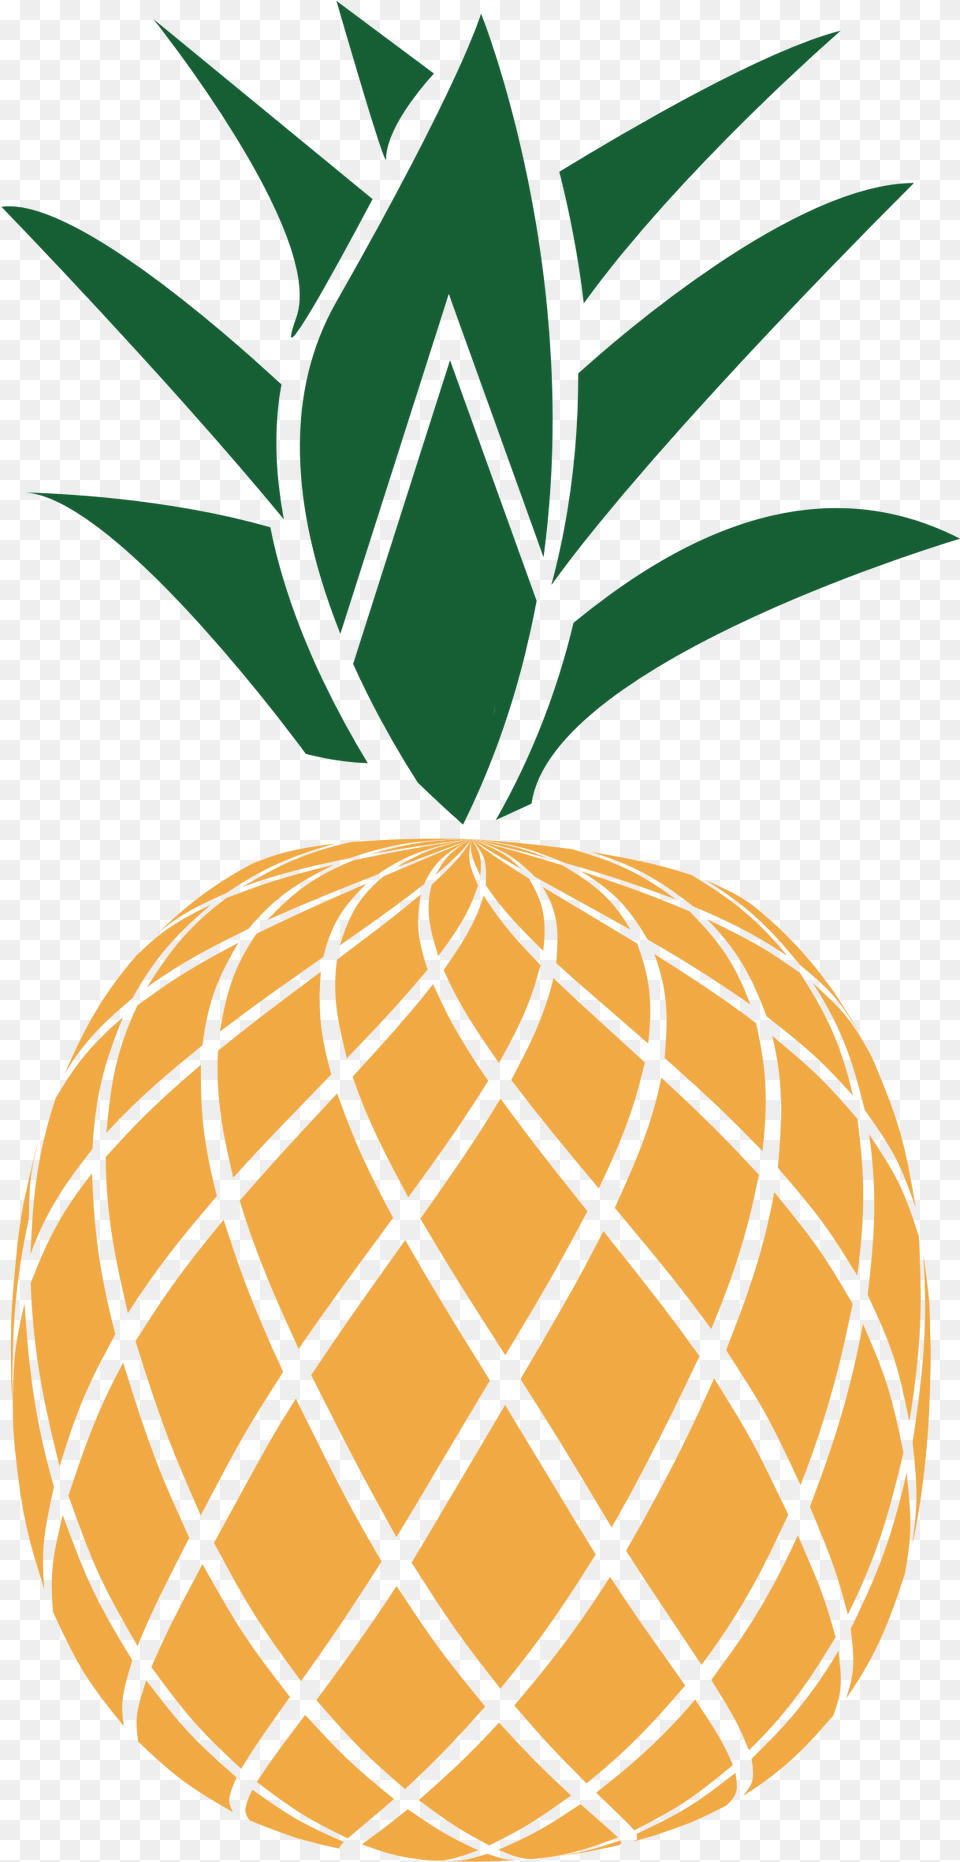 Download Pineapple Vector Clipart Pineapple Hawaiian Clip Art, Produce, Food, Fruit, Plant Png Image